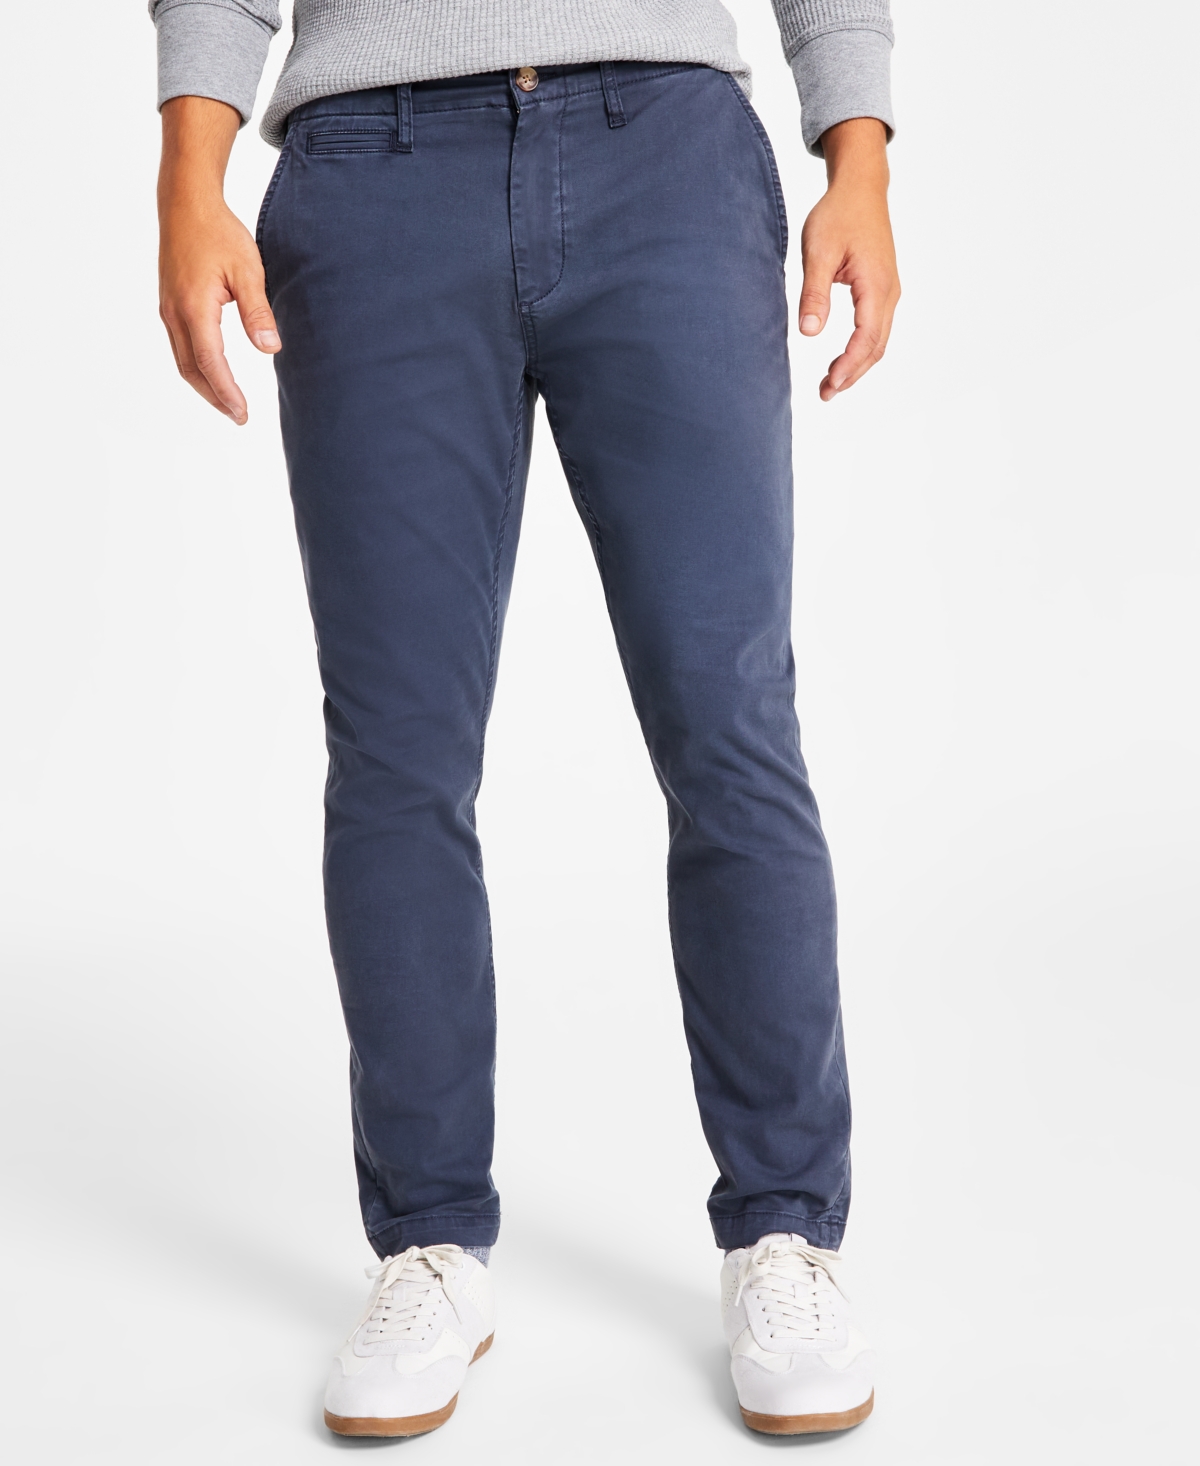 Men's Men's Dewy Slim-Straight Chino Pants, Created for Macy's - Fin